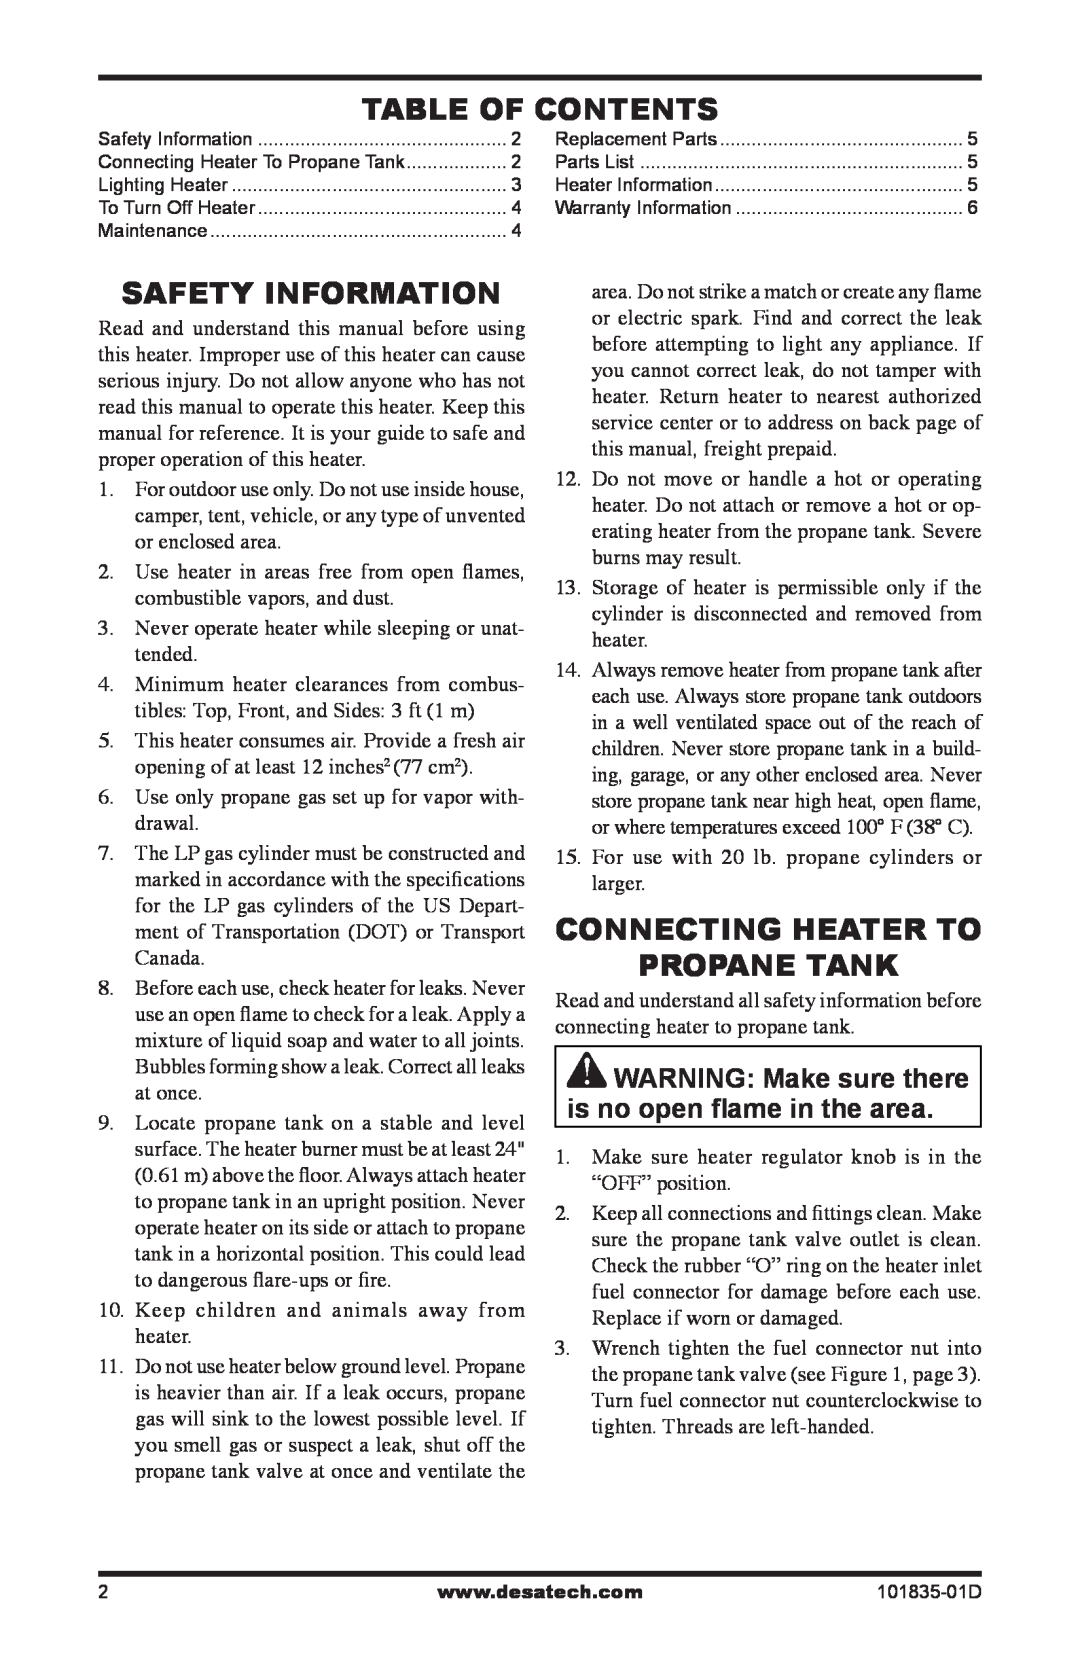 Desa TTC12B owner manual Table Of Contents, Safety Information, Connecting Heater To Propane Tank 